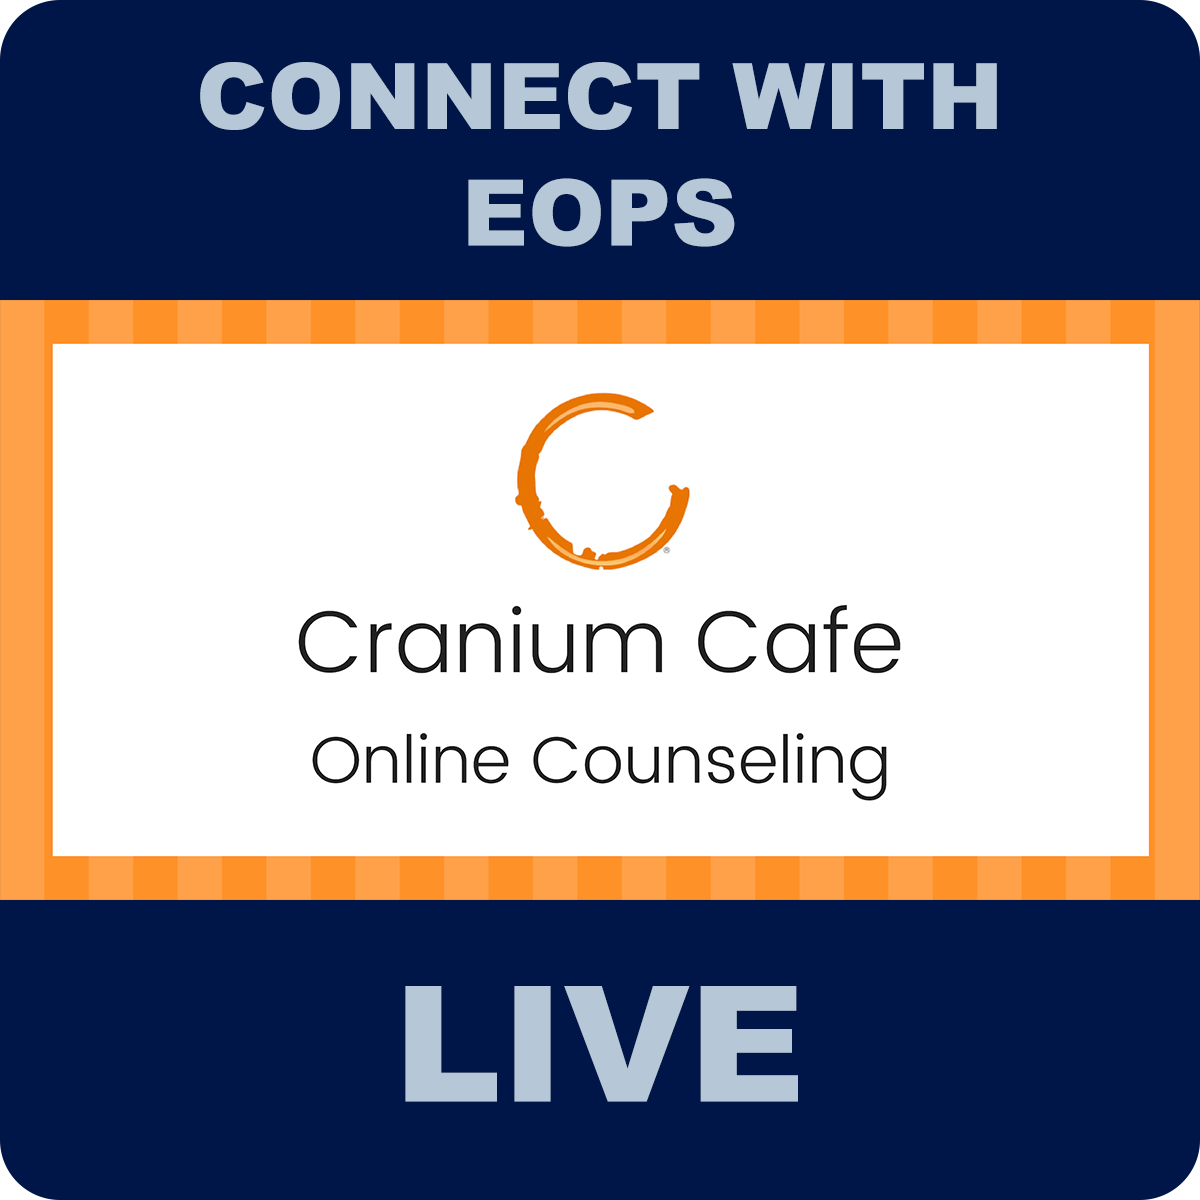 Connect with EOPS live